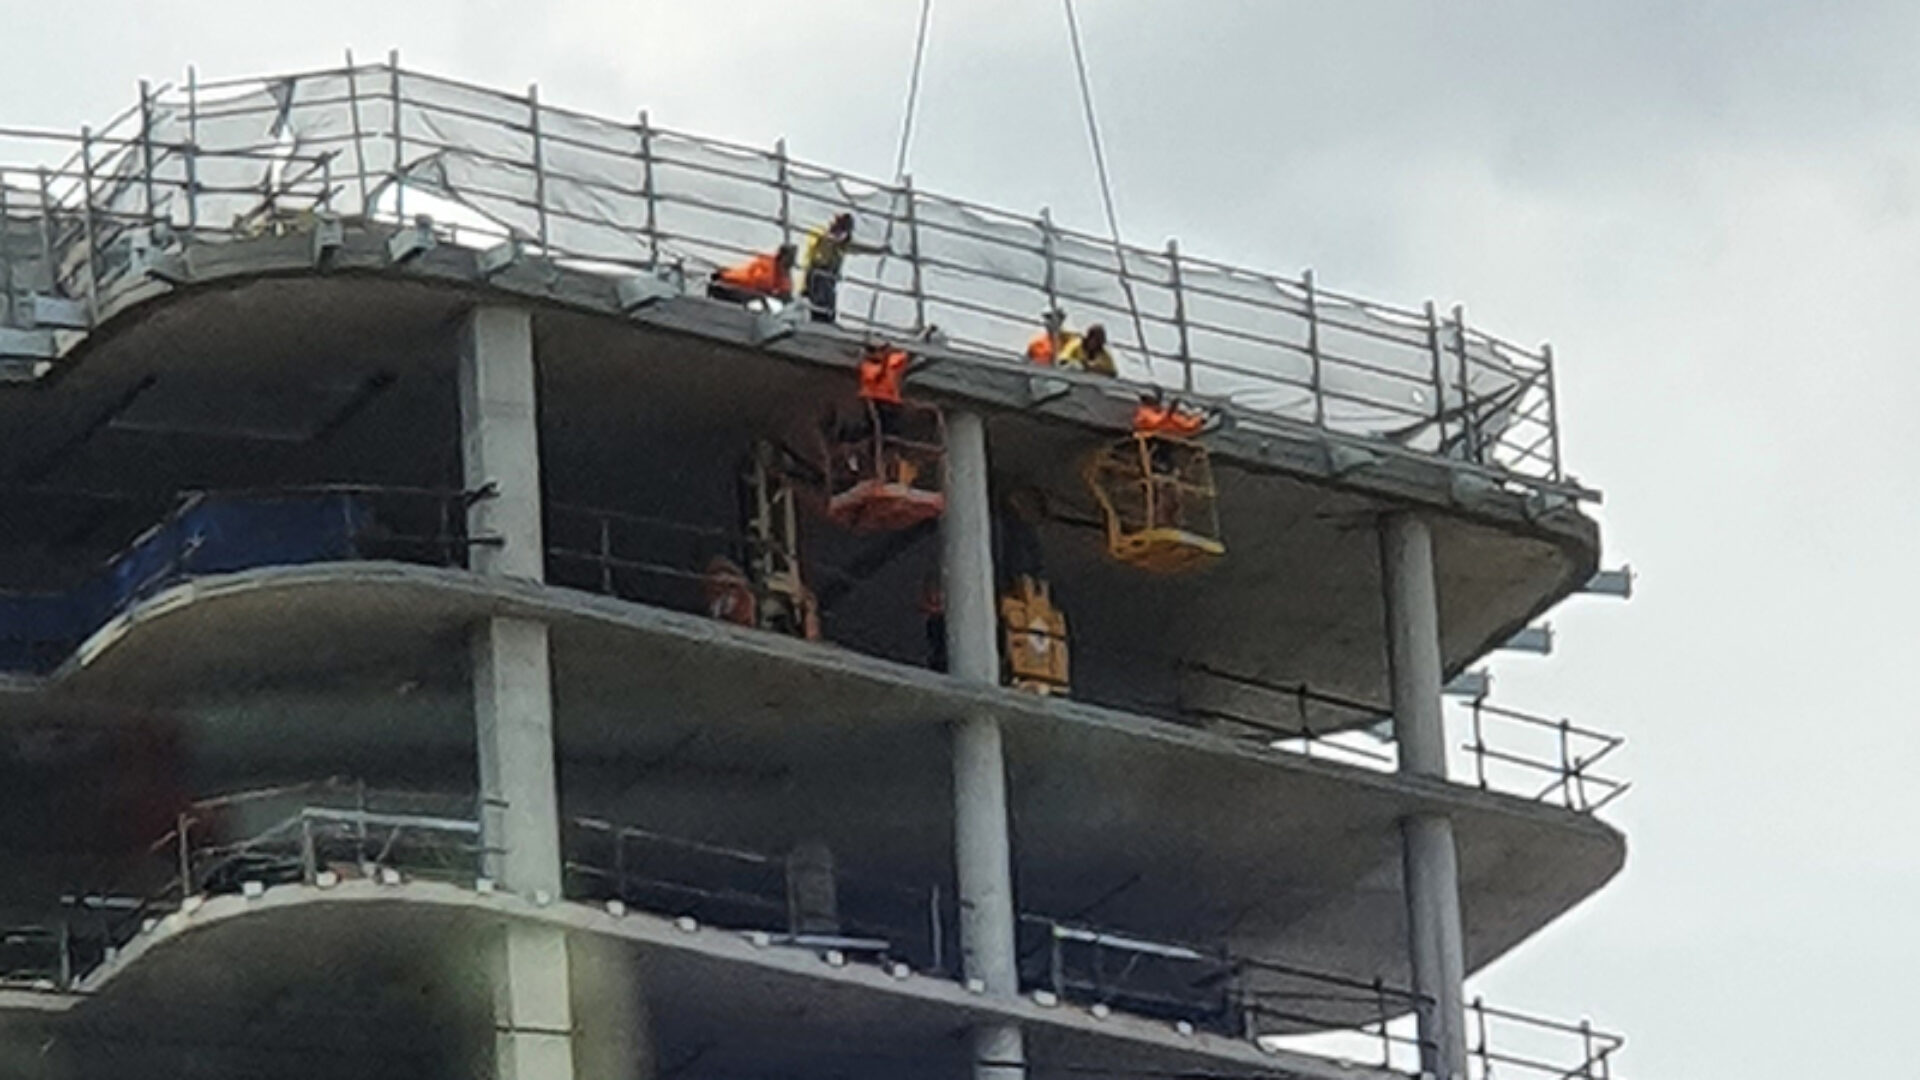 Workers installing an abseil system on an under-construction apartment building.